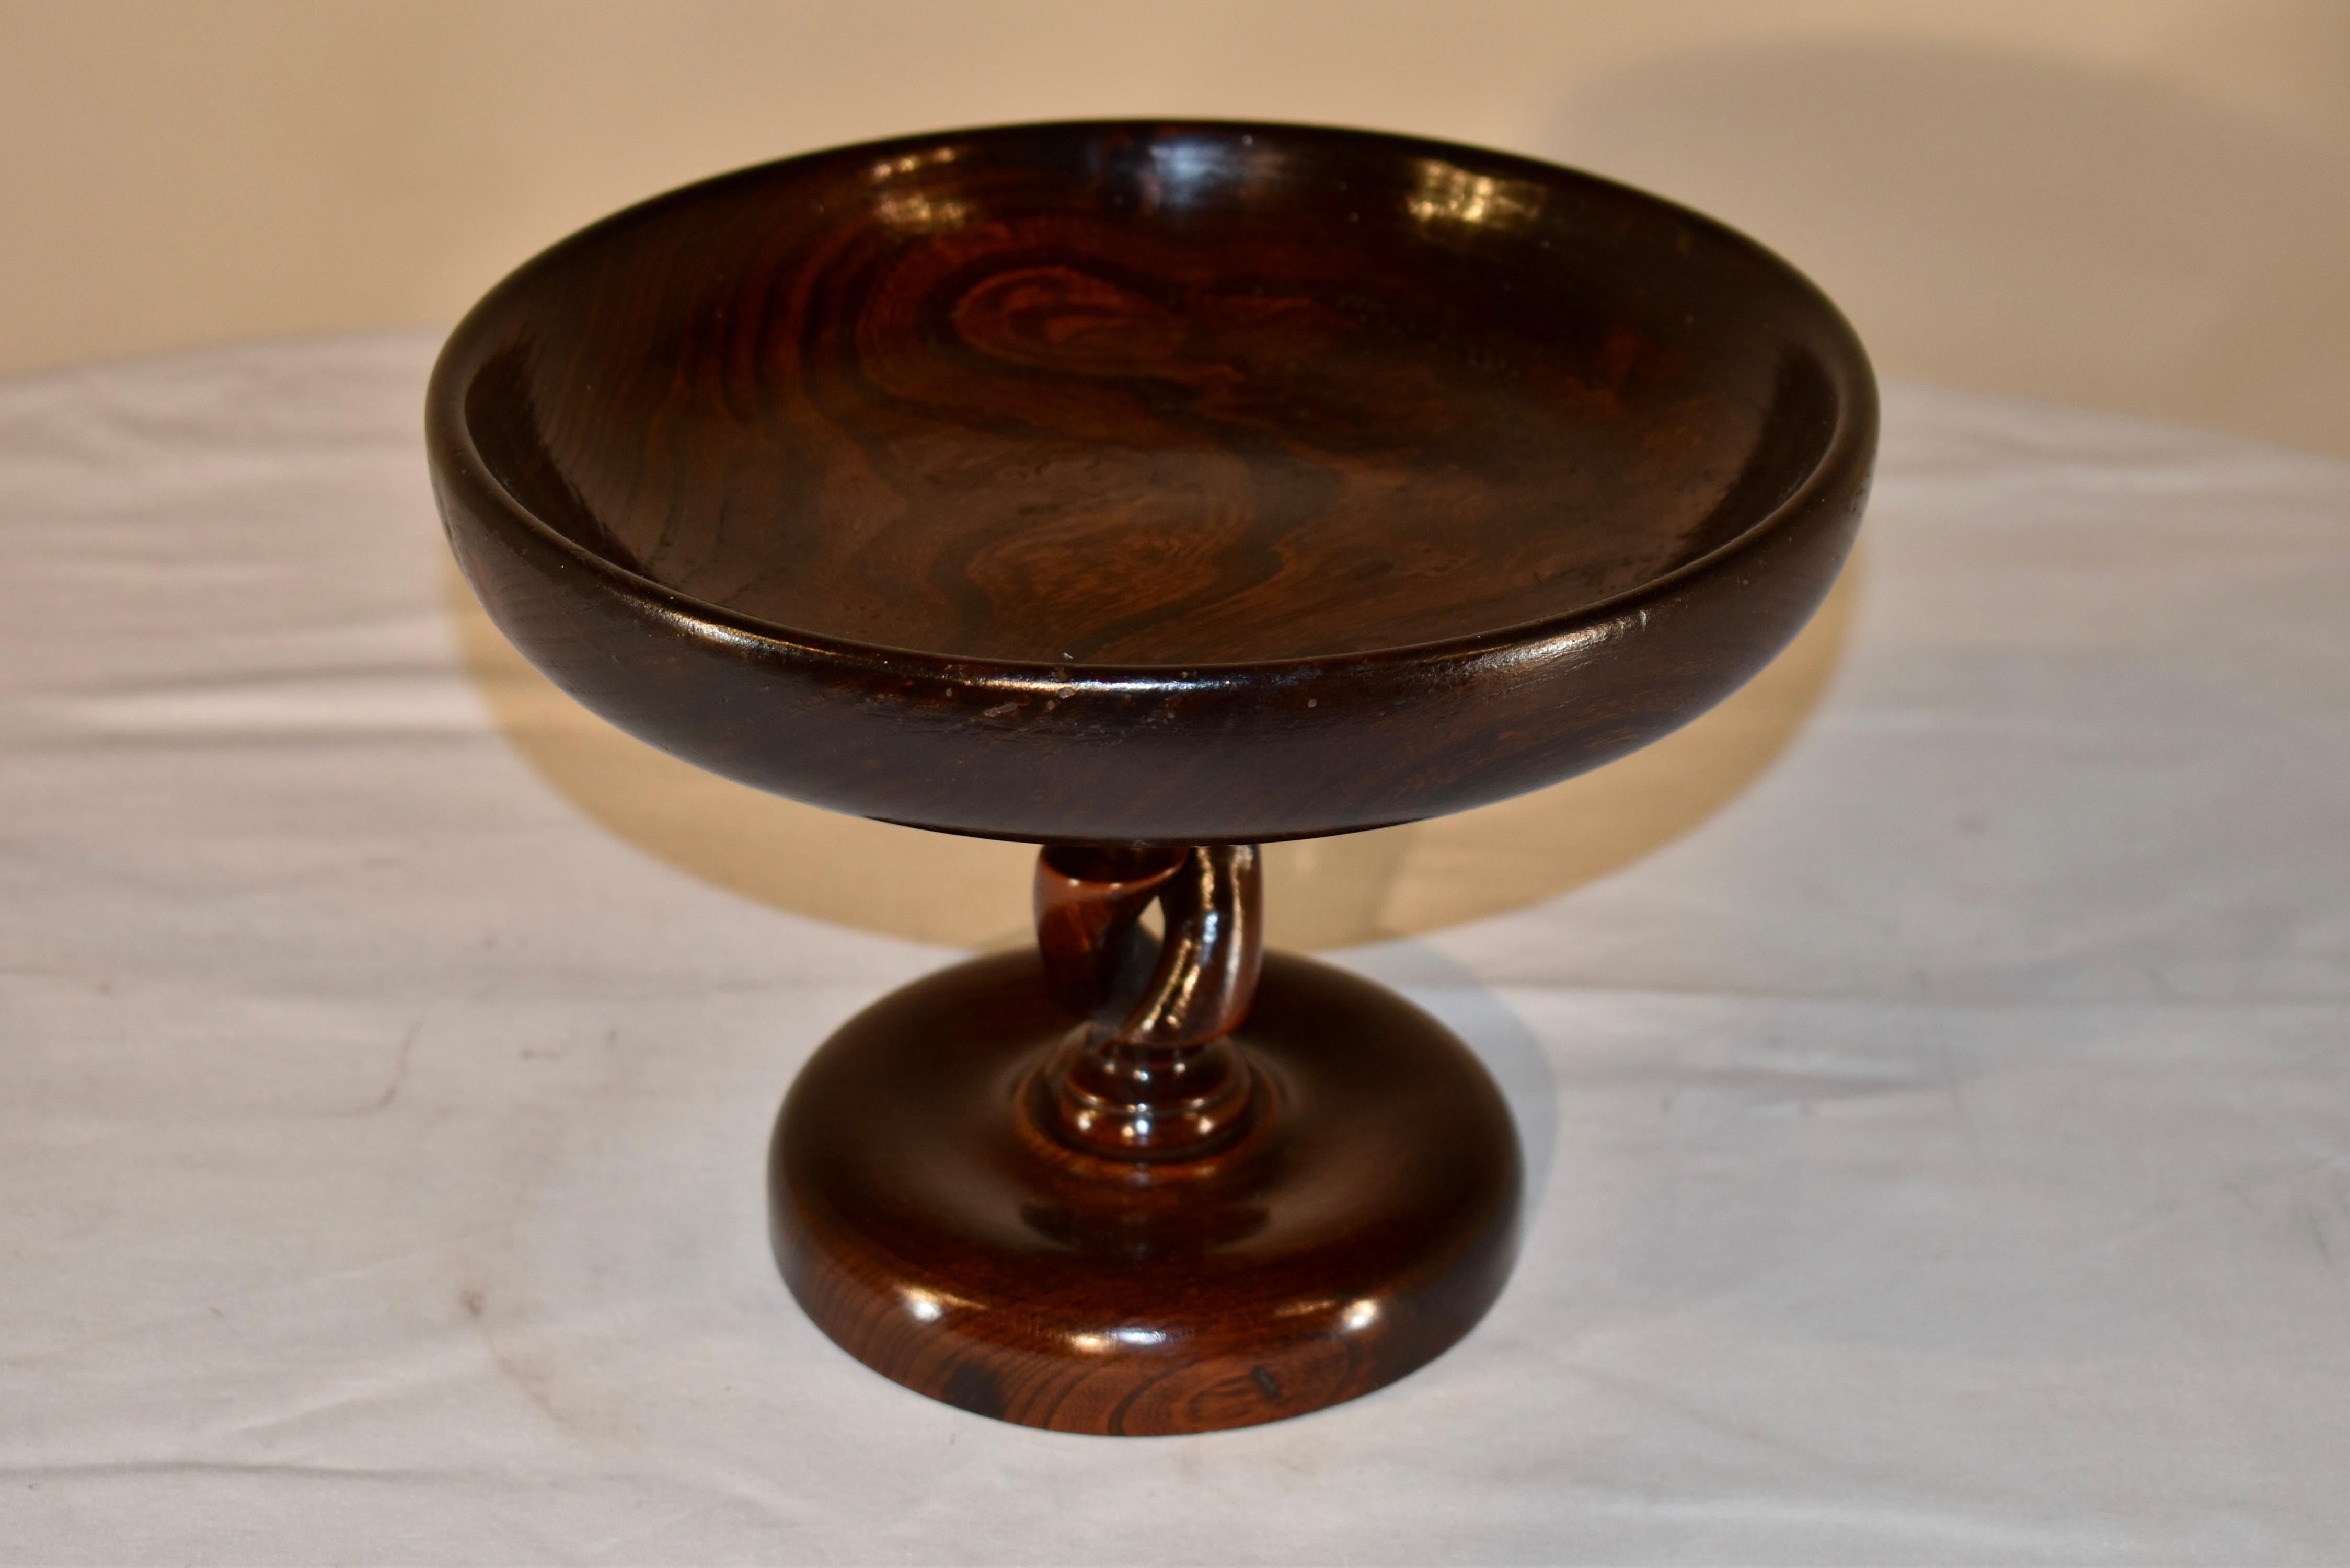 19th century oak compote from England. The piece is hand turned and has a lovely bowl at the top with excellent graining, supported on a hand turned open barley twist stem, which is supported on a hand turned base.